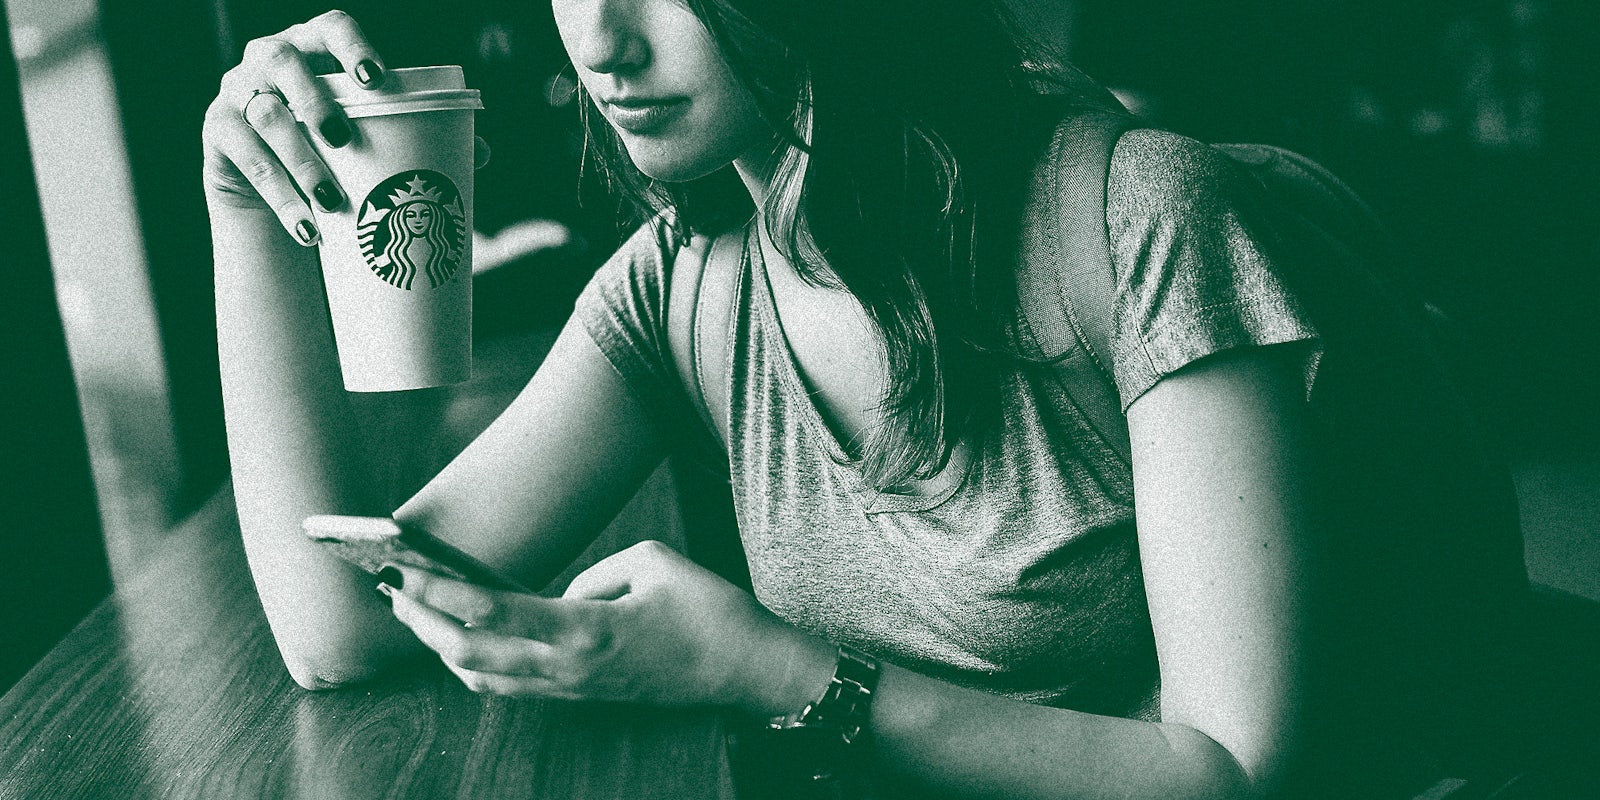 A woman drinking coffee on her phone.